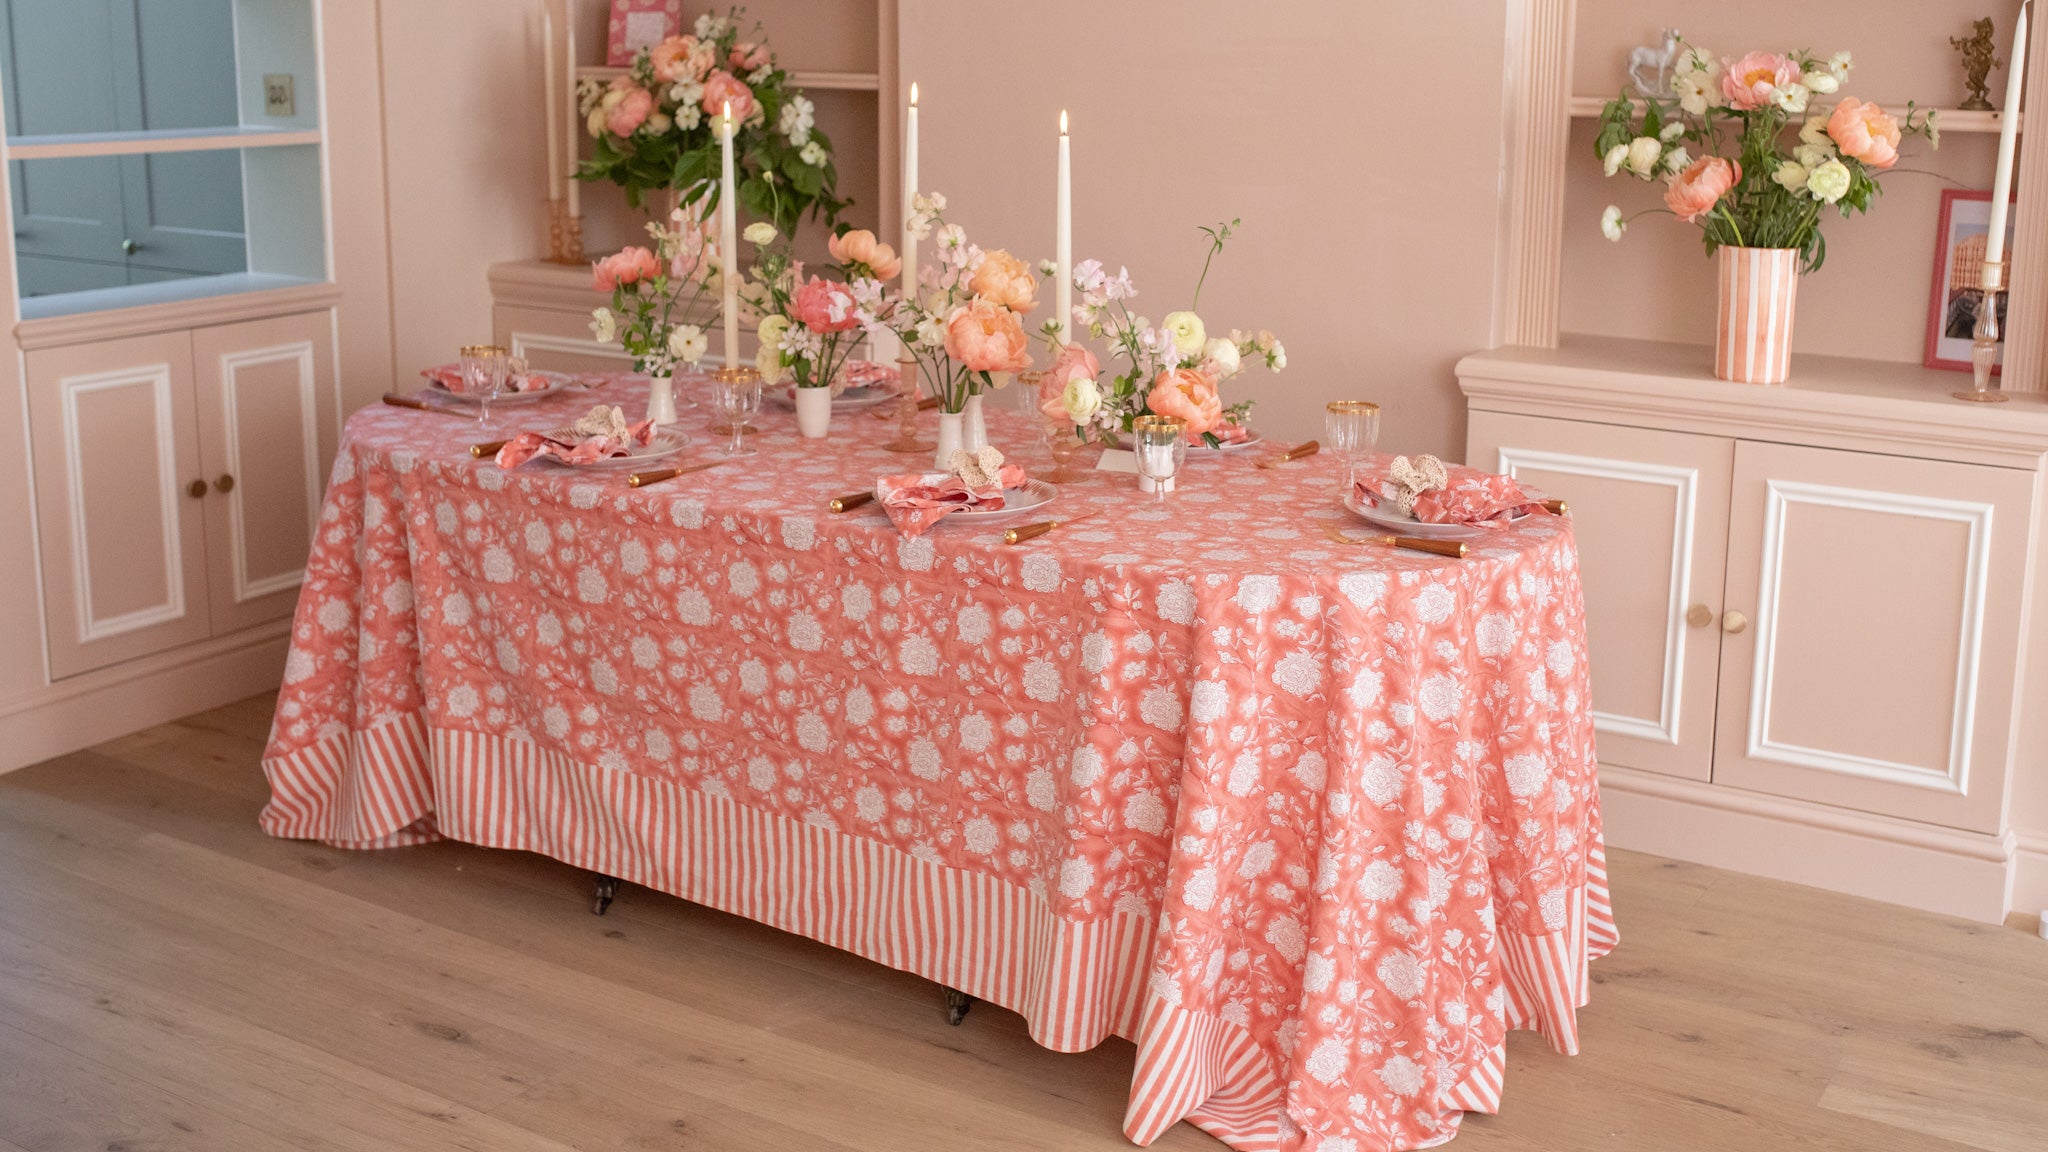 Spring Peony Tablescape